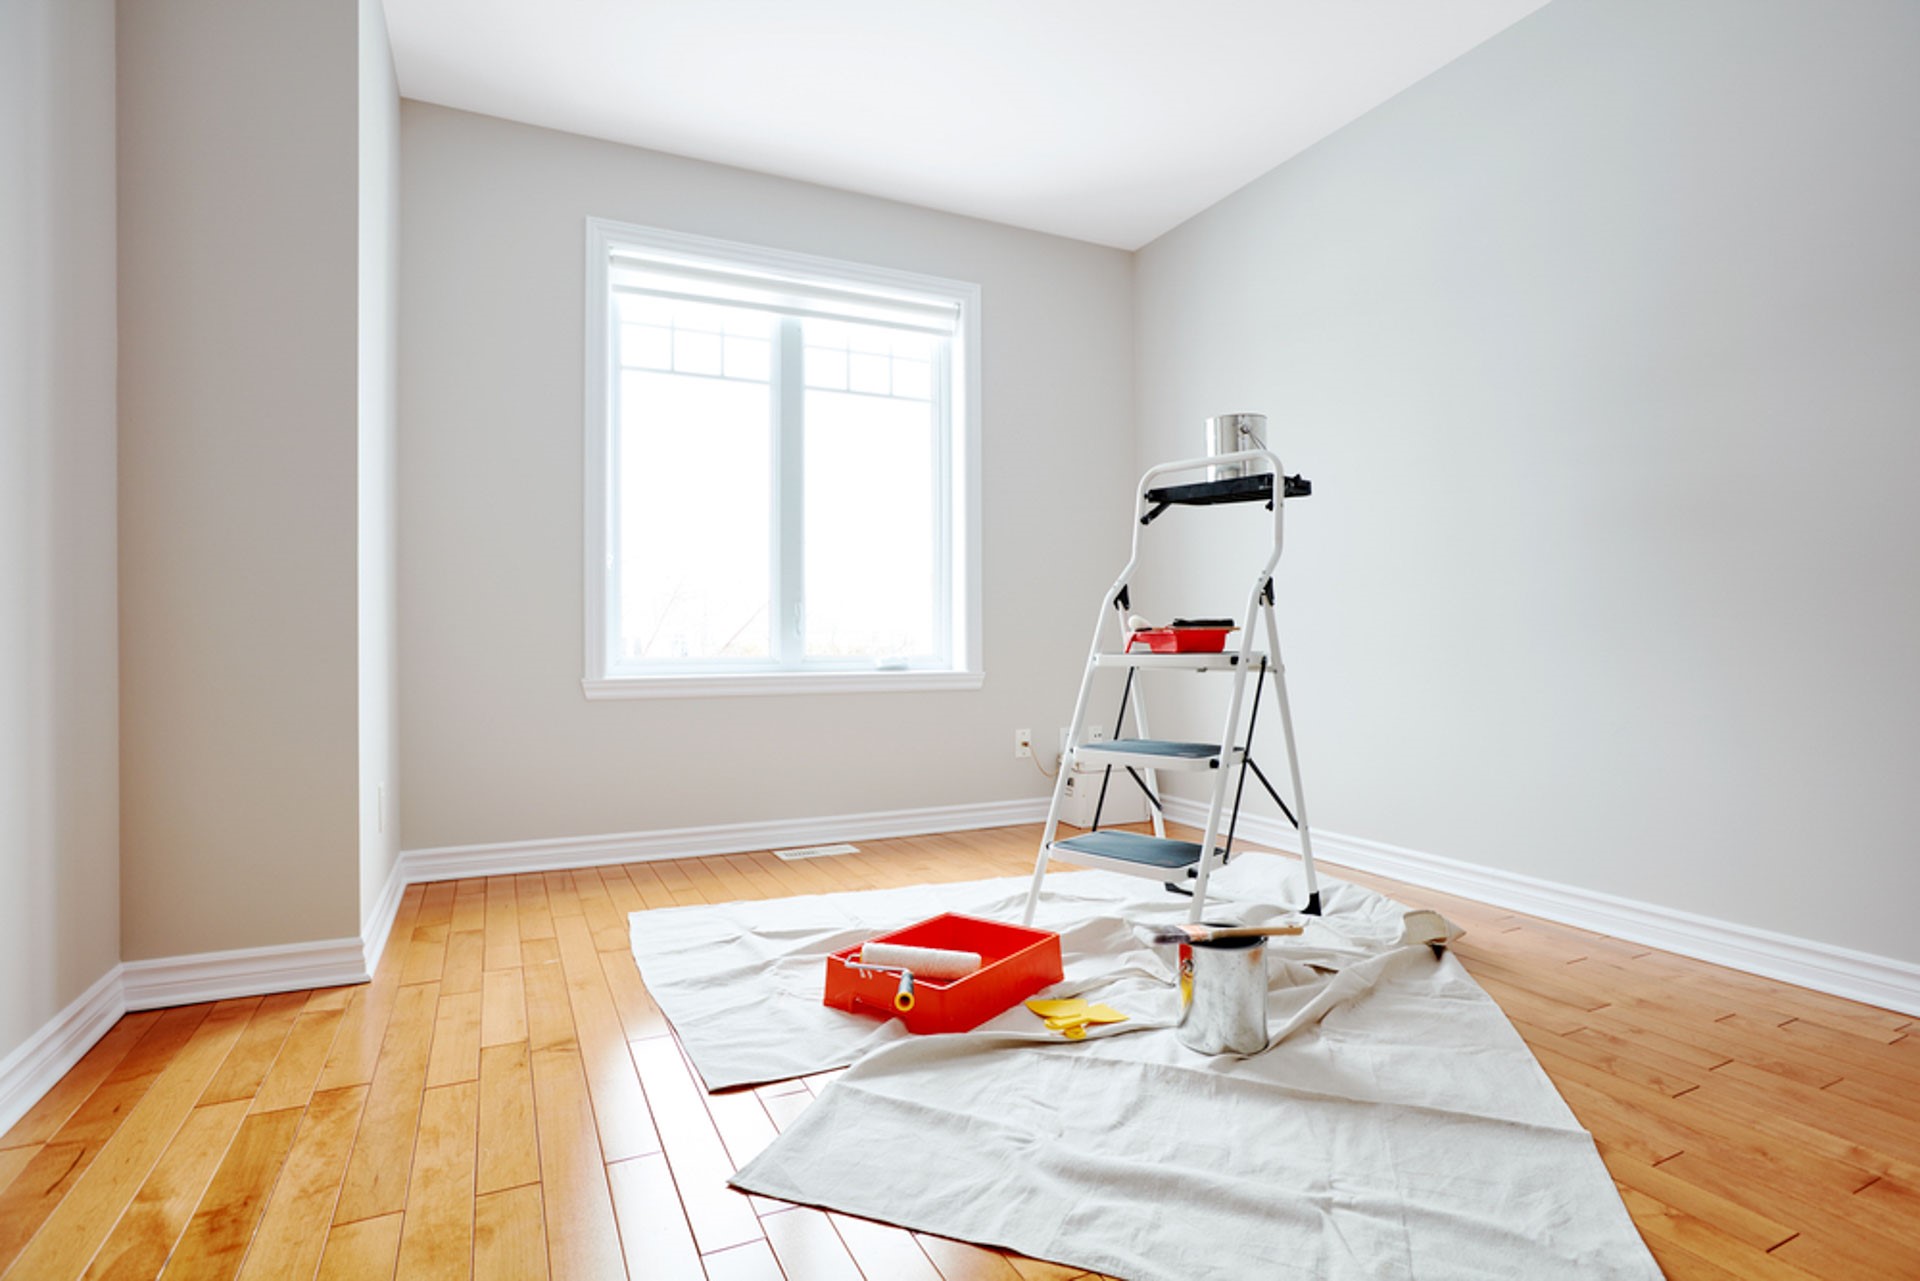 How to find the Best Local House Painters